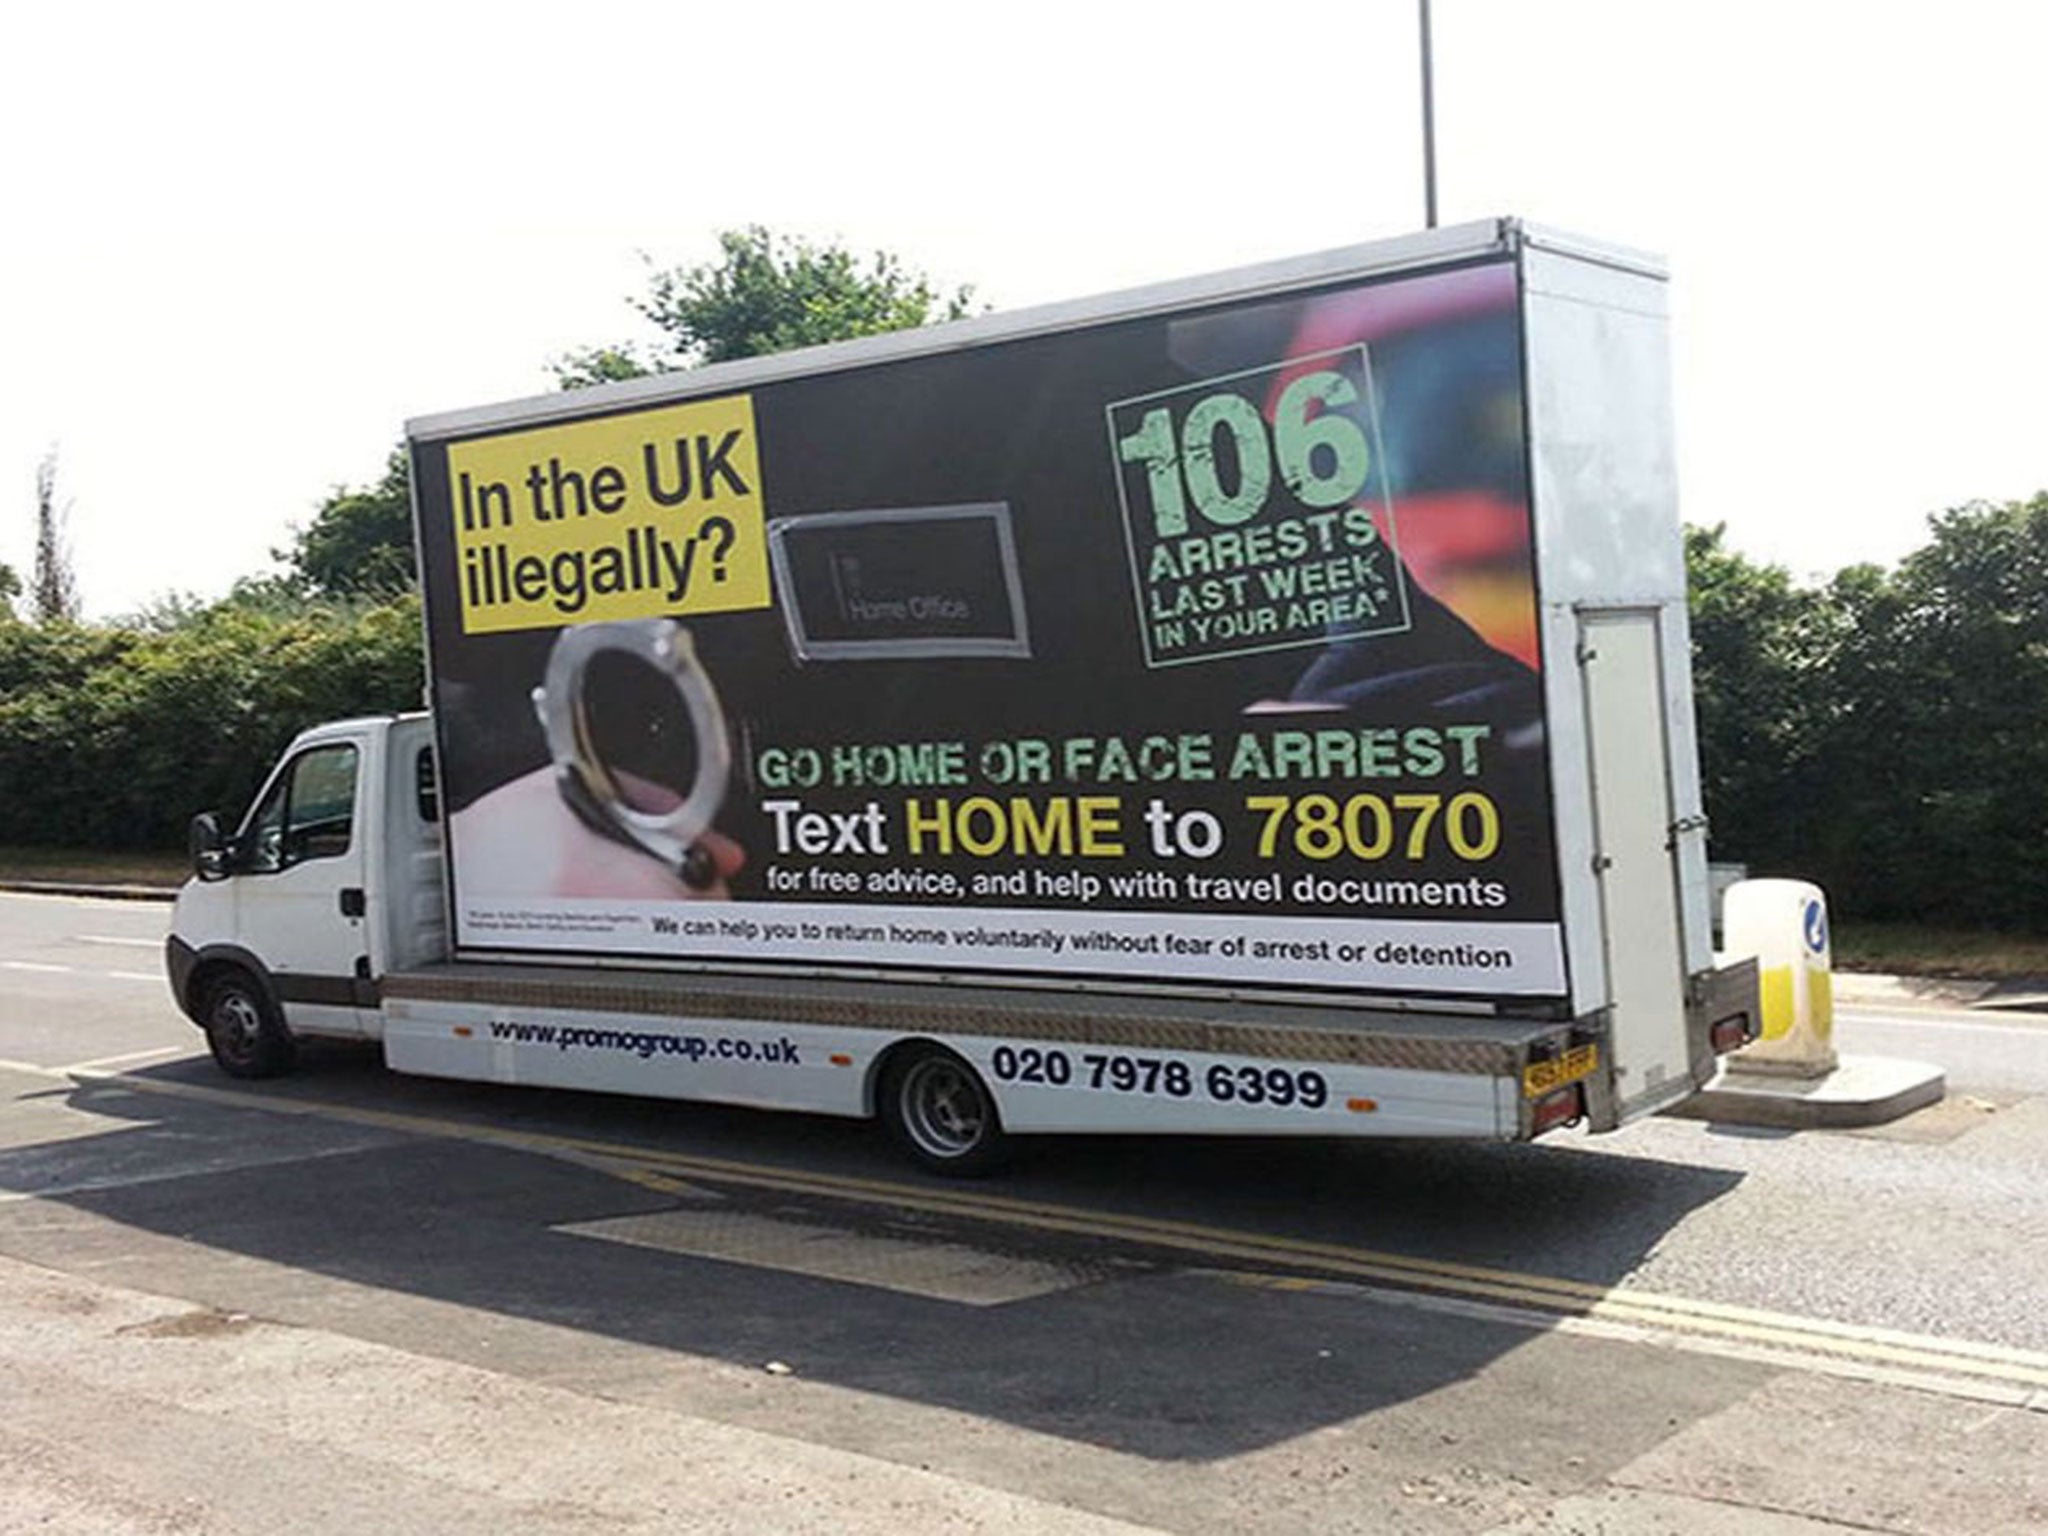 Controversial policies such as the use of billboard vans warning illegal immigrants to “go home or face arrest” has led to legal migrants being subjected to racial prejudice, the Ipsos MORI study concluded